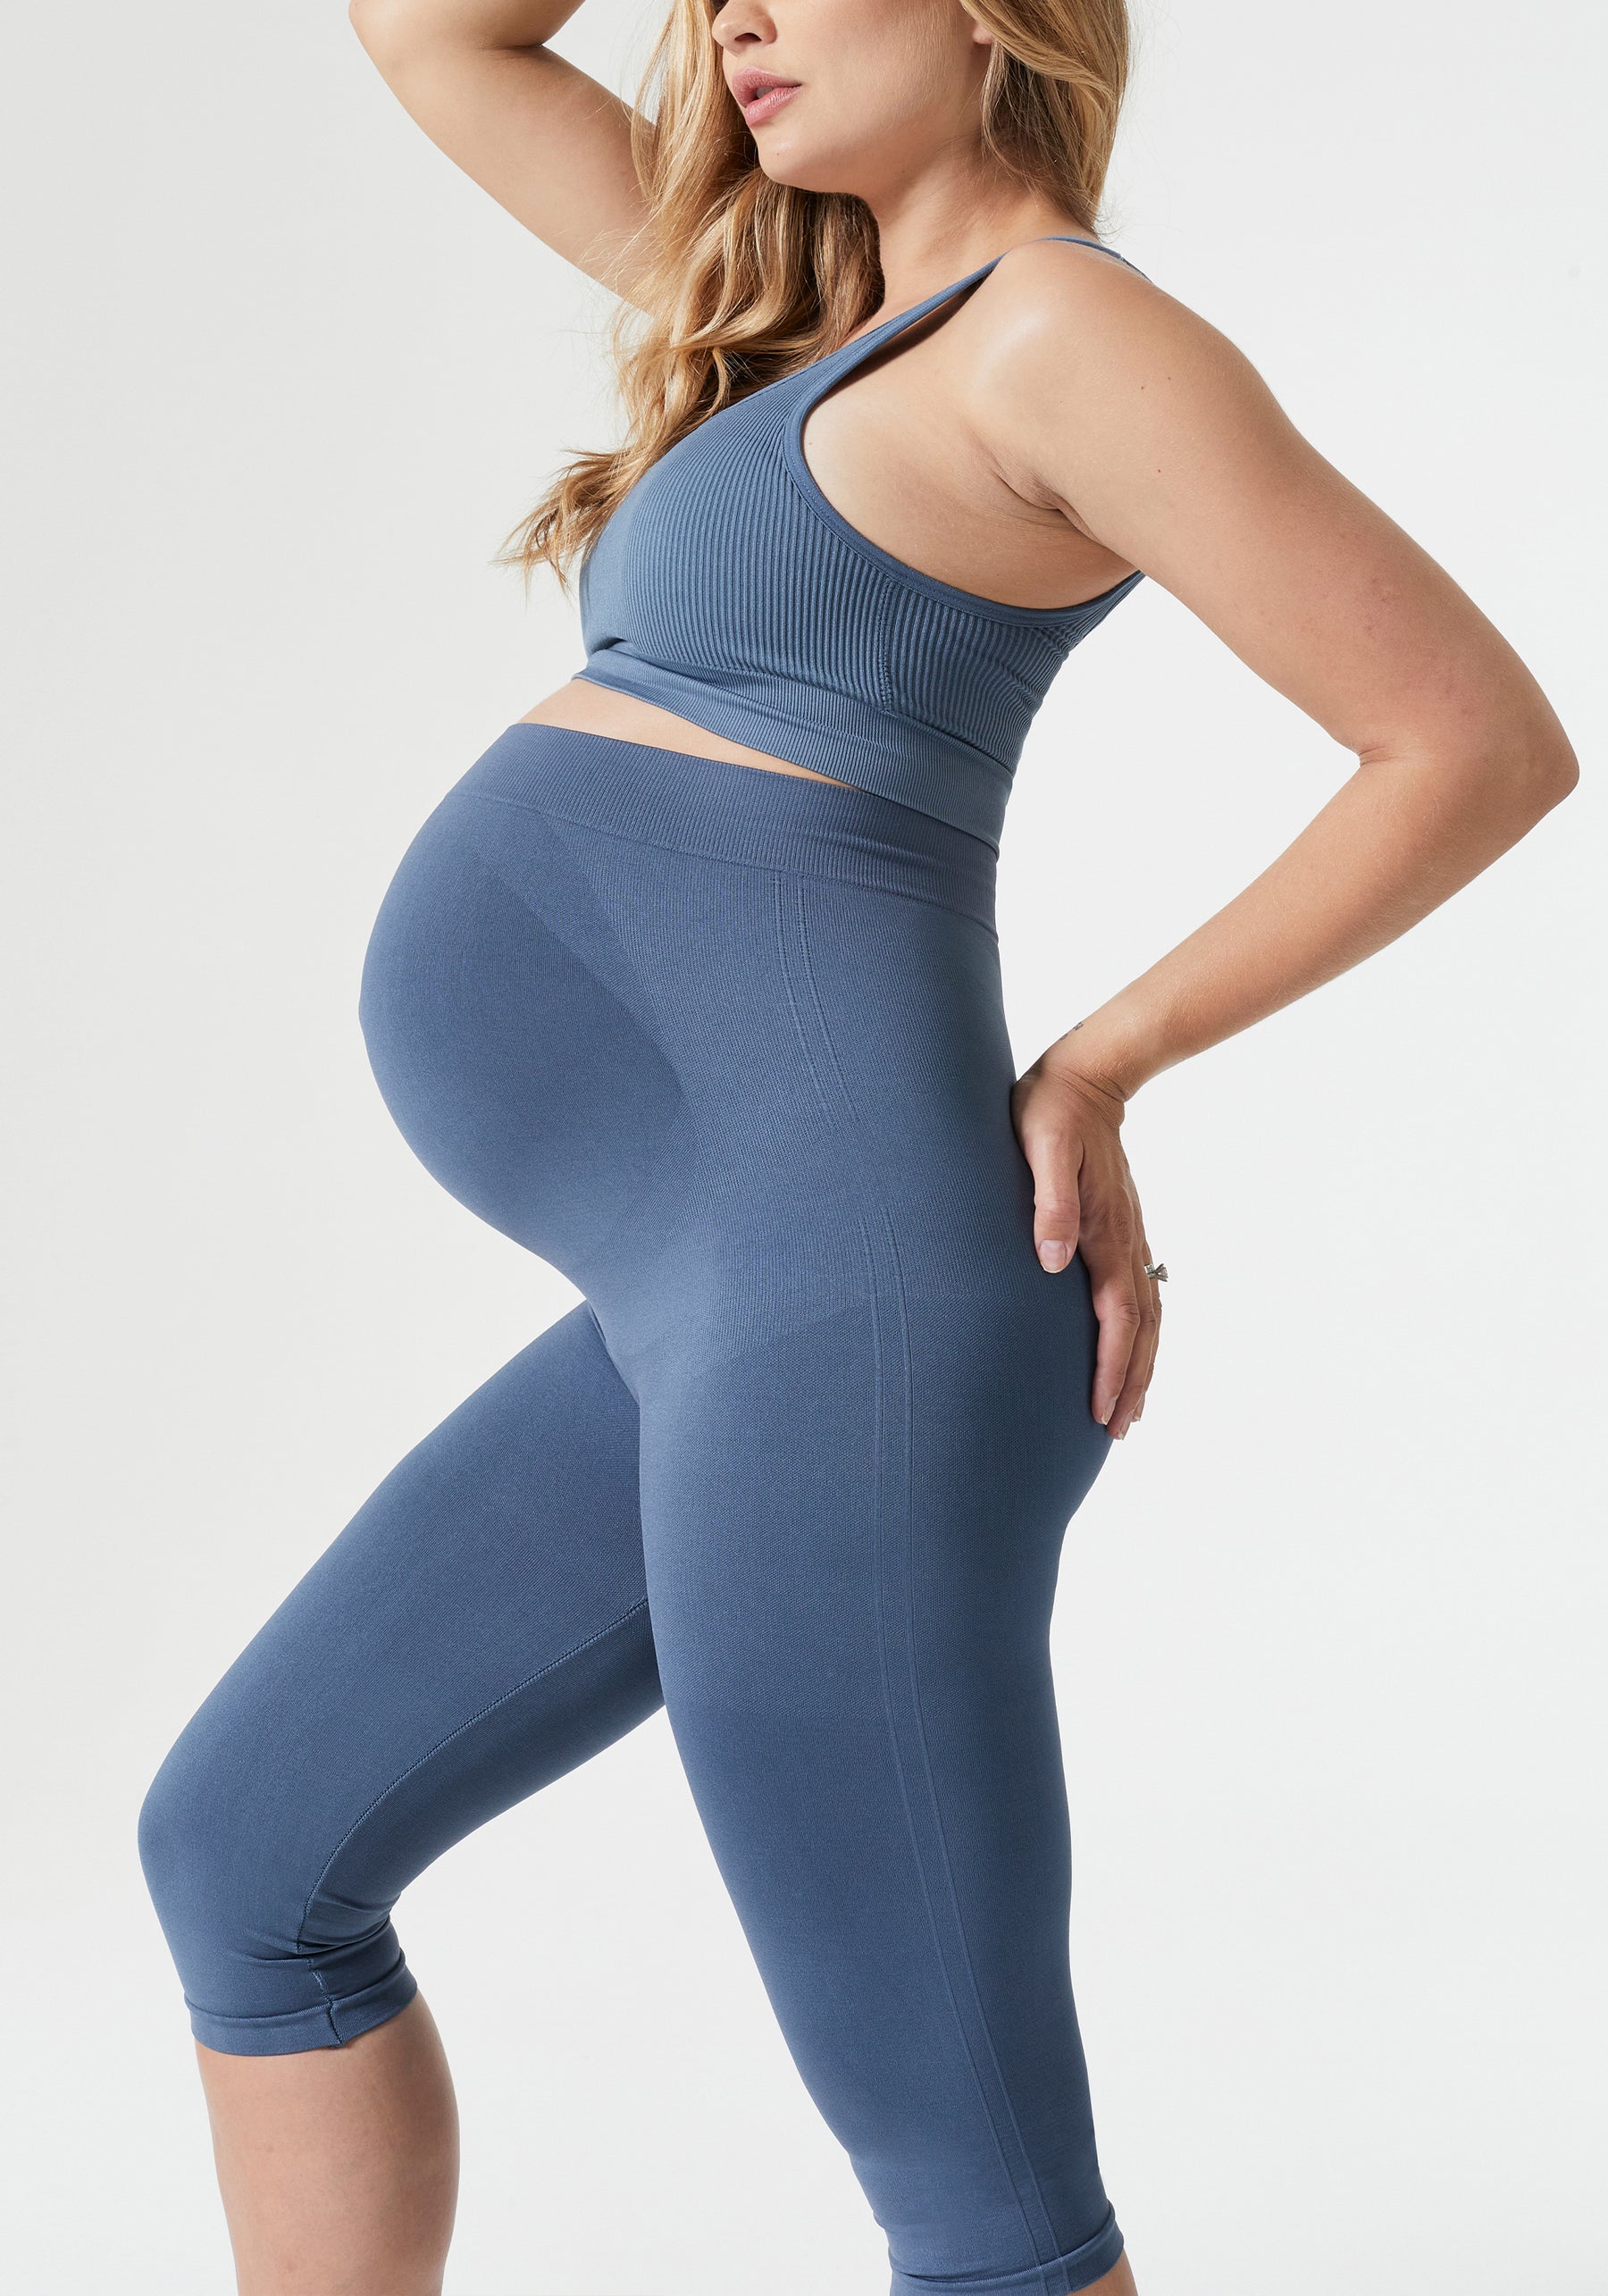 HEGALY Women's Maternity Flare Leggings Over The Belly - Casual Pregnancy Yoga  Pants with Pockets Buttery Soft Teal Blue, Teal Blue, XL : Buy Online at  Best Price in KSA - Souq